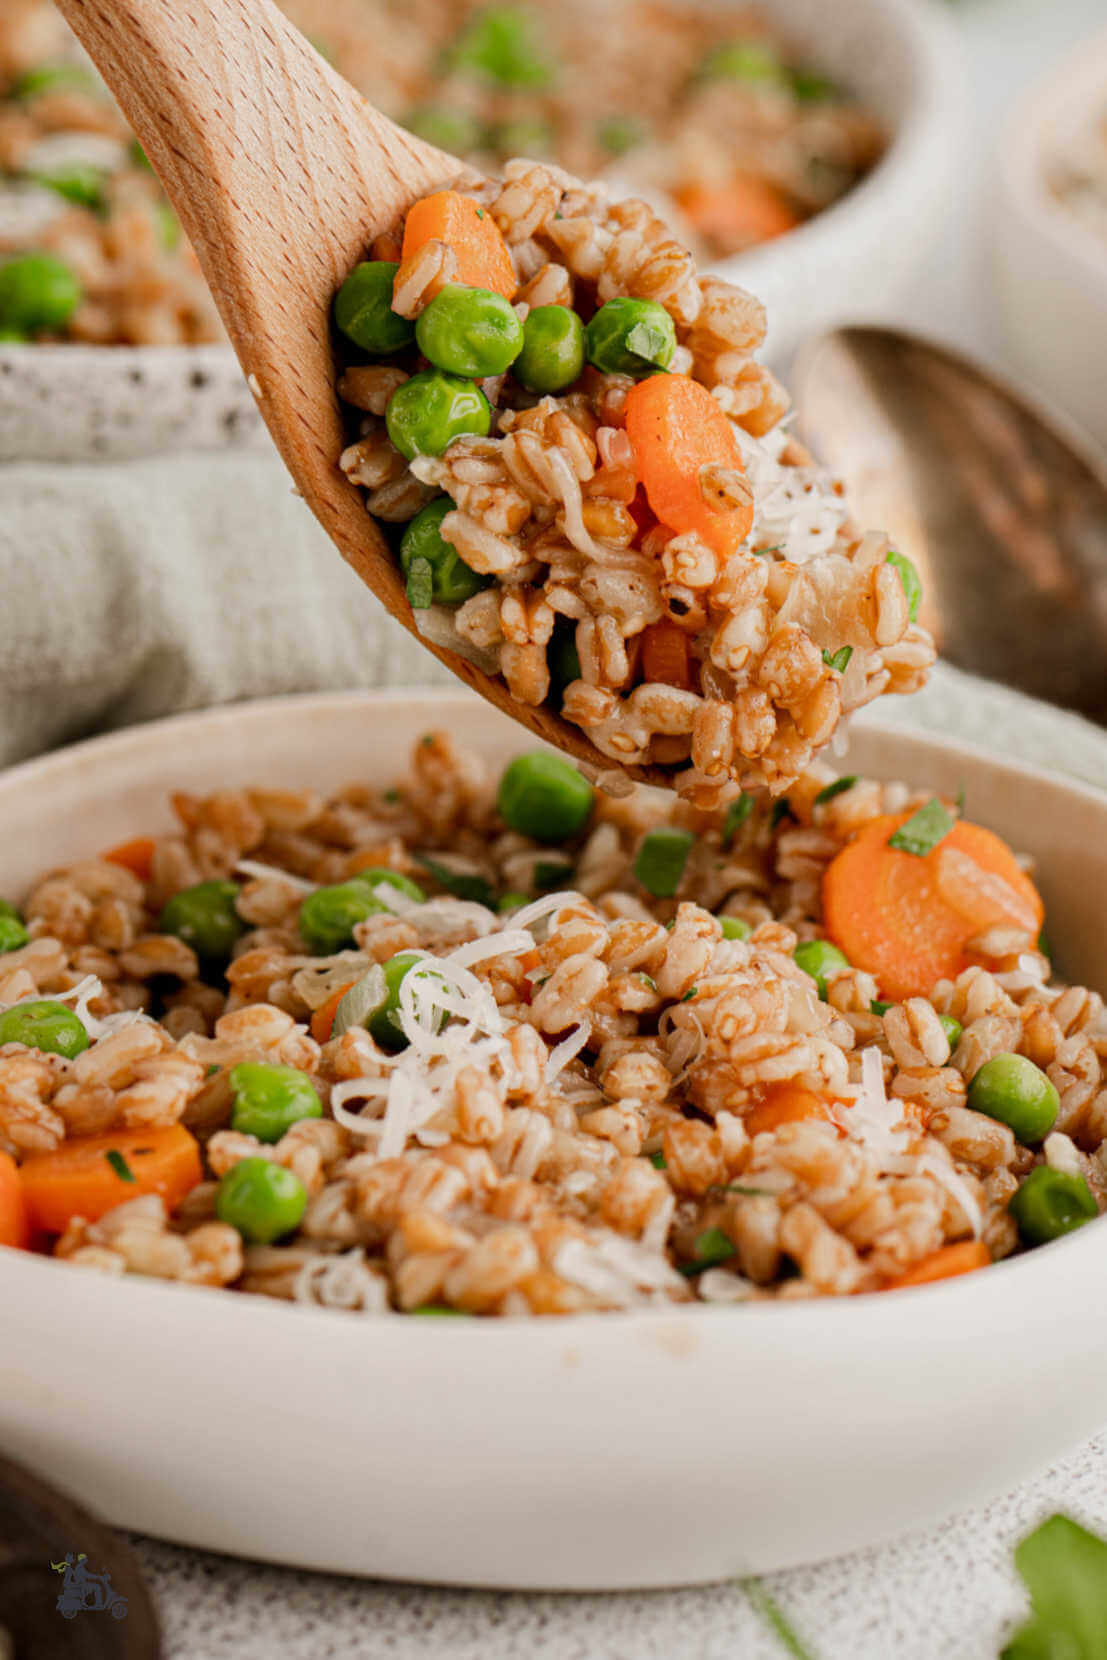 A wooden spoon serving a helping of cooked farro, peas, and carrots resembling Italy's classic dish of Risi e Bisi. 